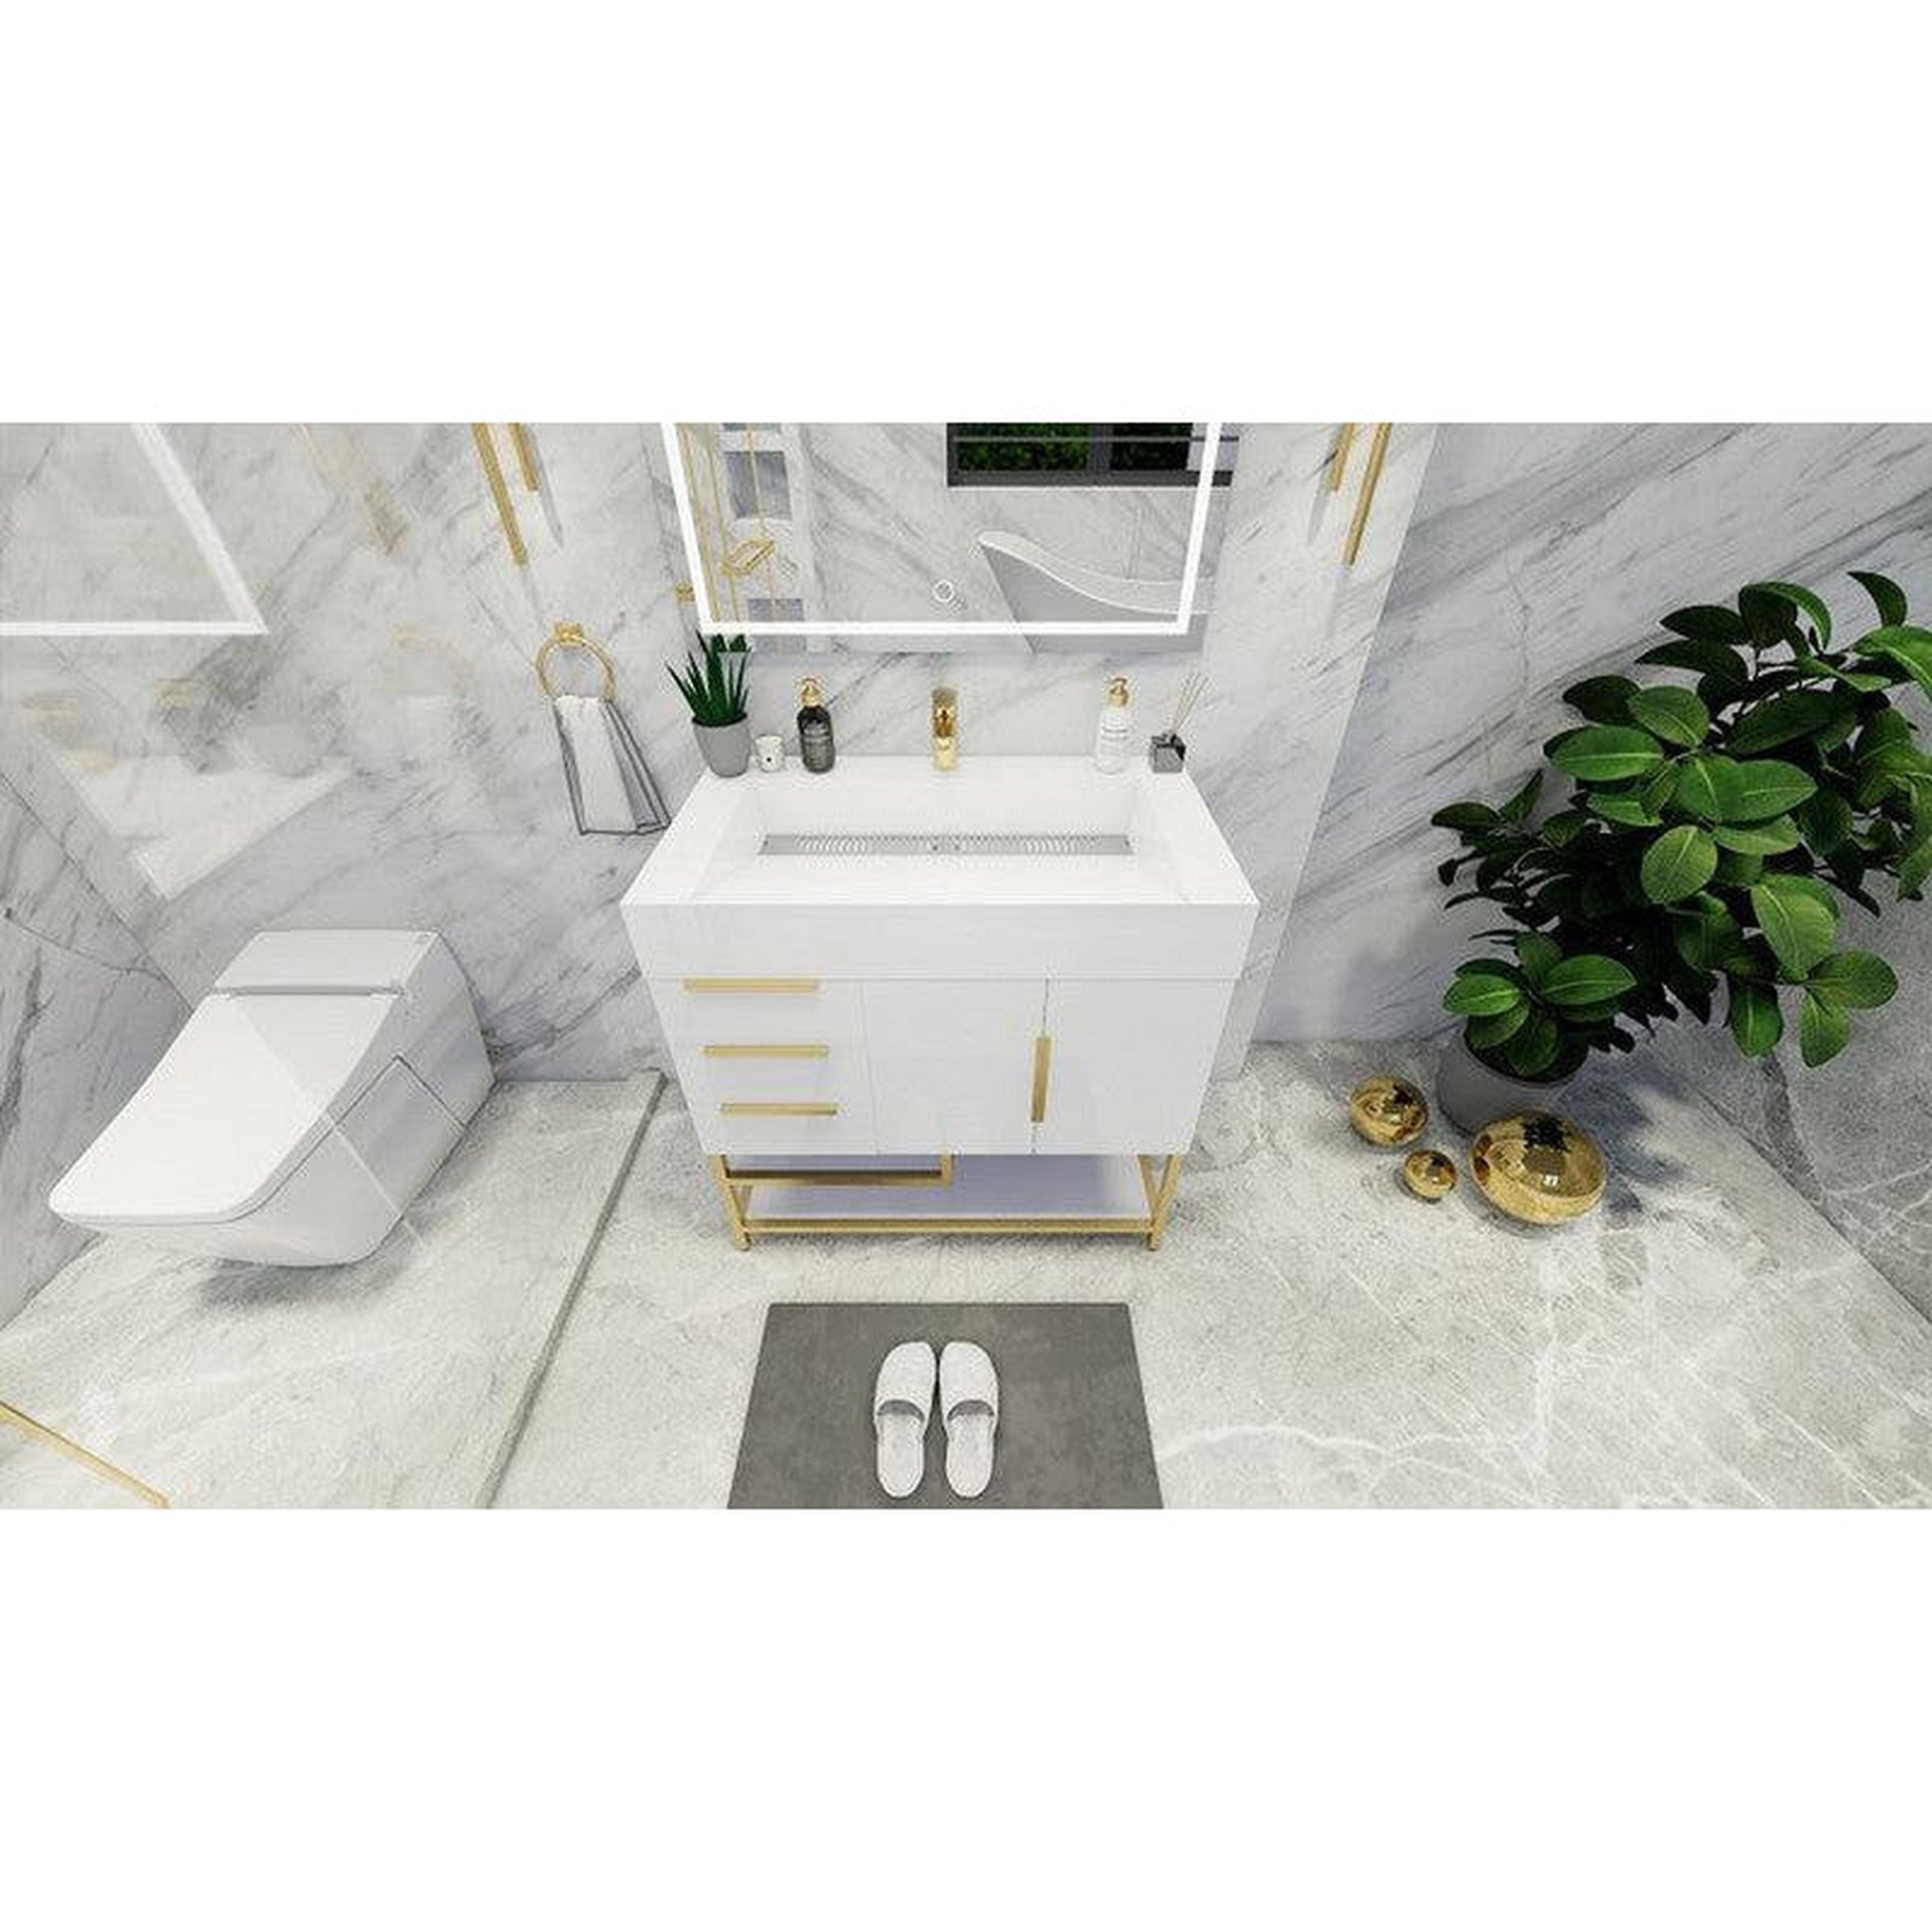 Moreno Bath Bethany 36" High Gloss White Freestanding Vanity With Left Side Drawers and Single Reinforced White Acrylic Sink